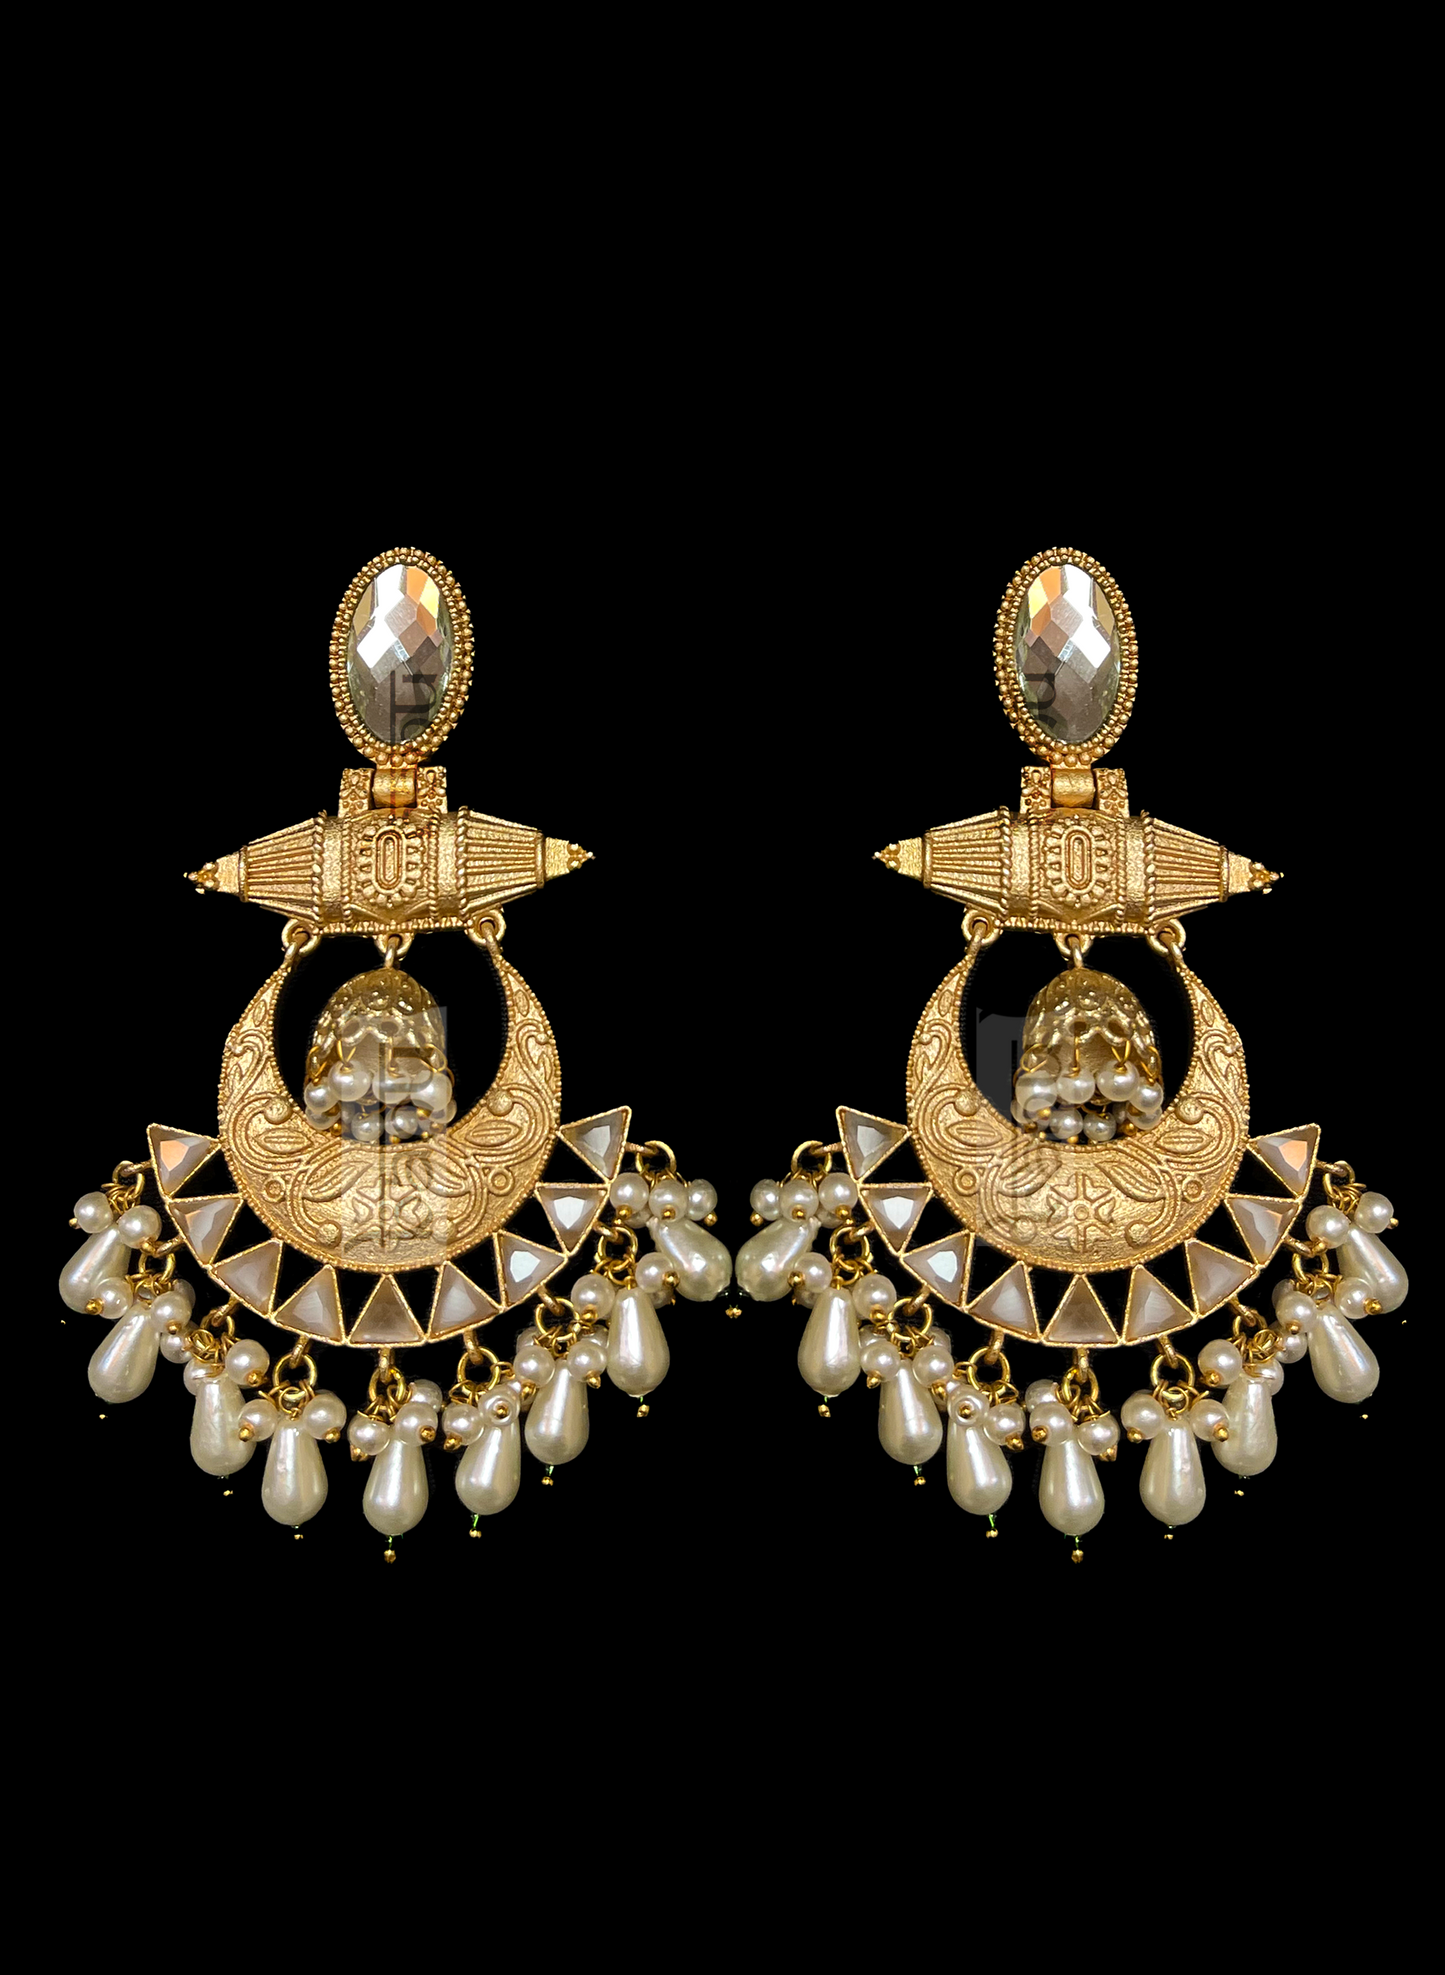 Silver Amrapali earrings with pearls for Indian brides